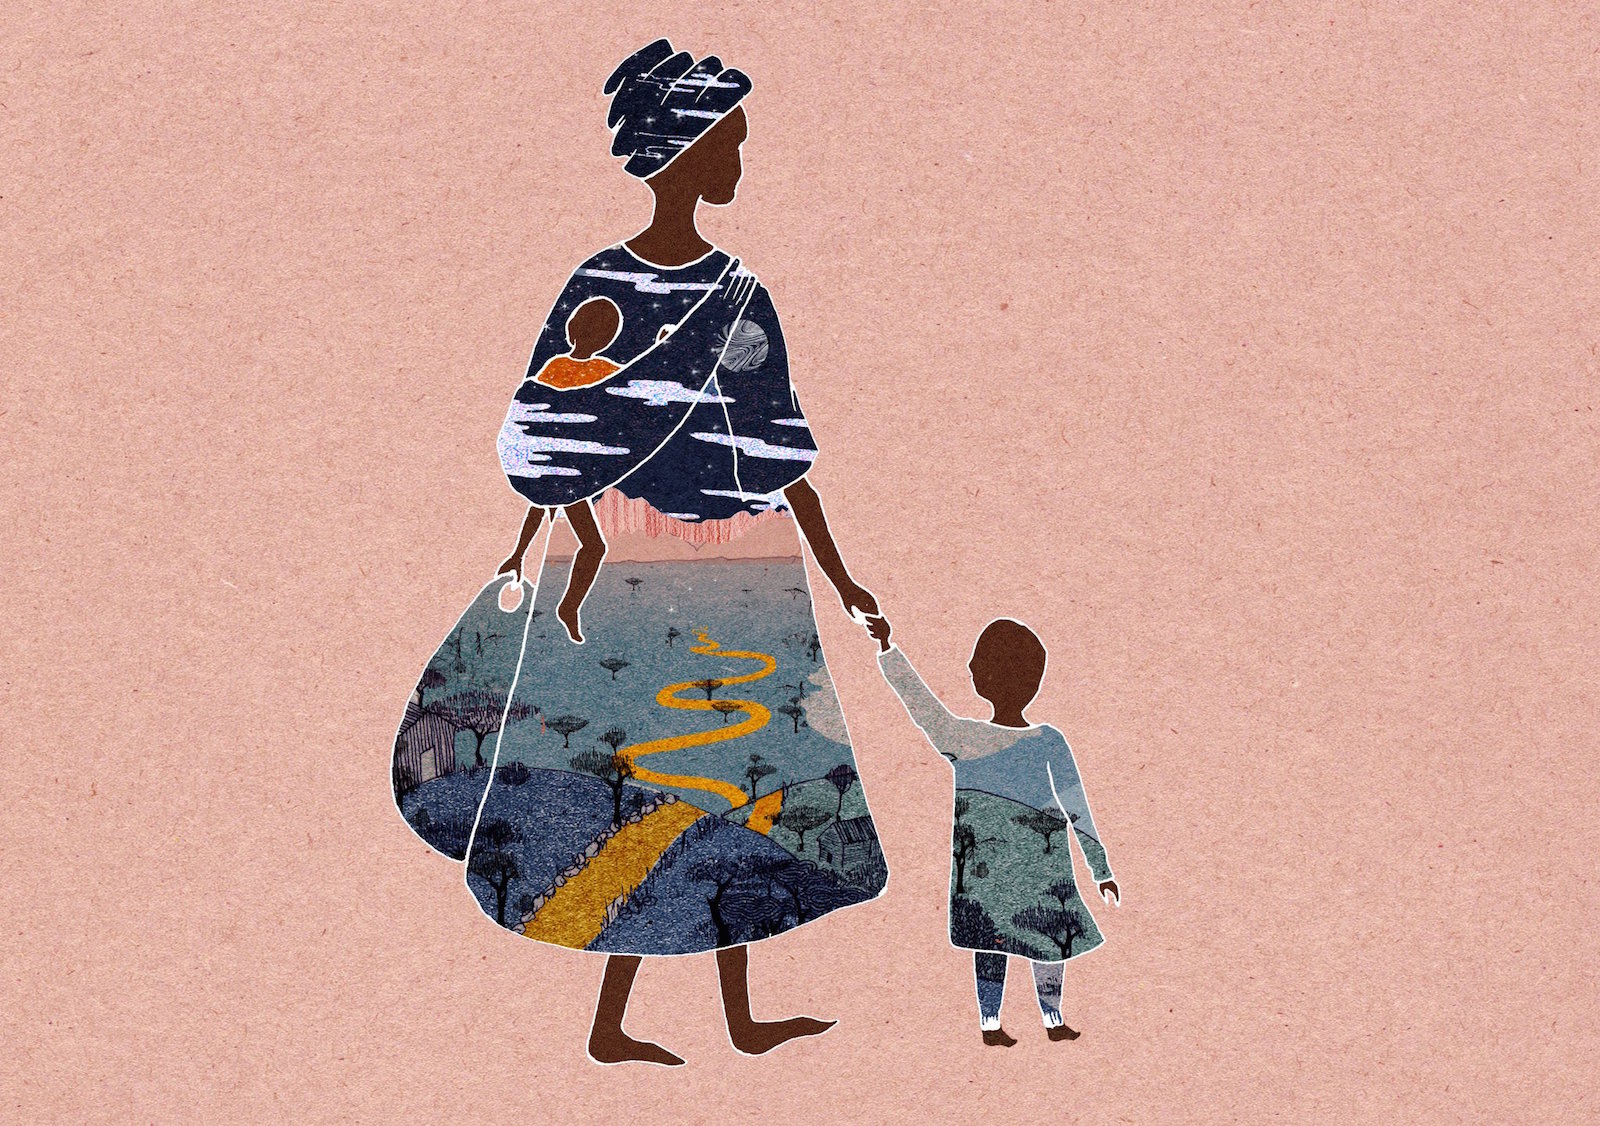 charlotte edey dreamy illustrations featured